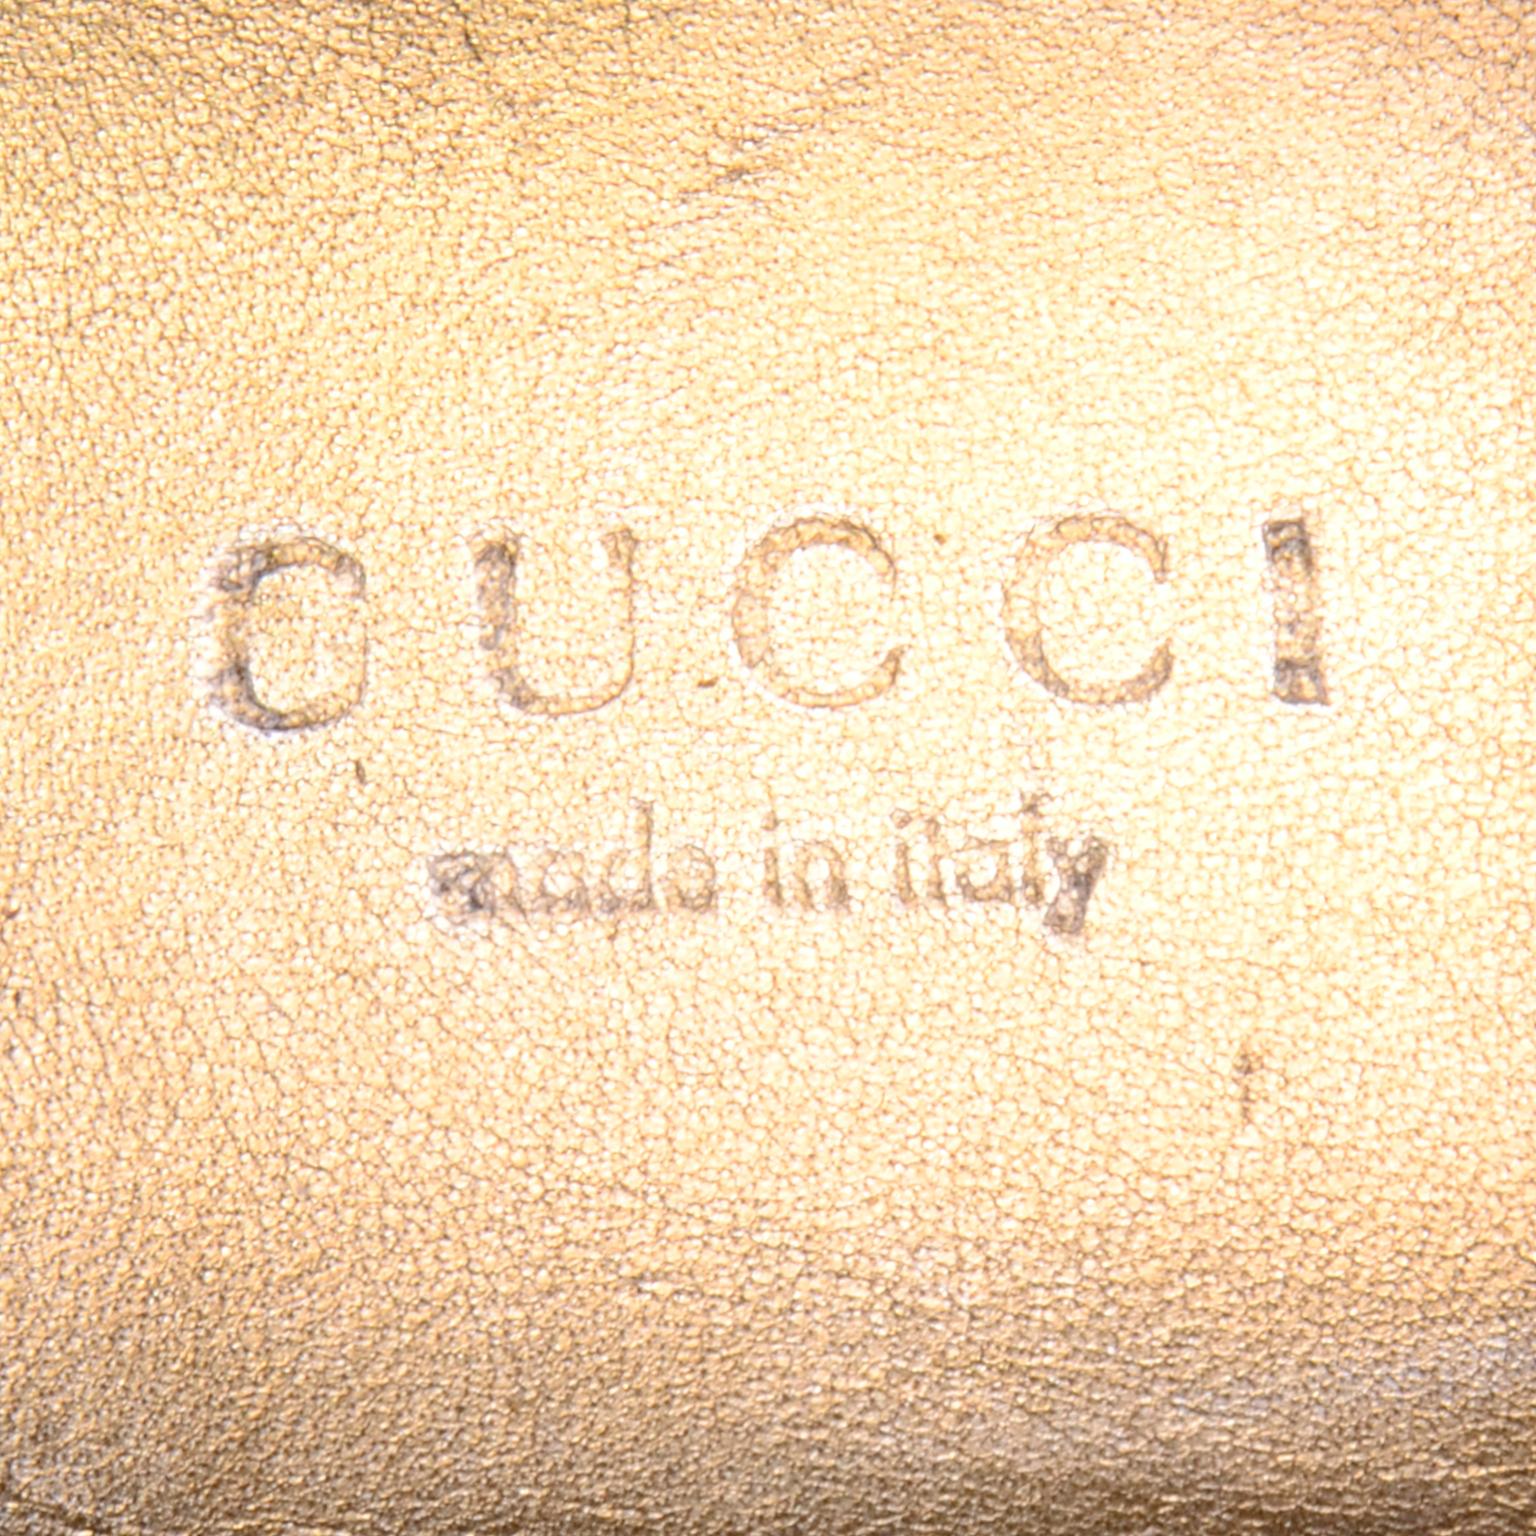 Gucci Monogram Logo Gold Sneakers Canvas & Leather Trainers w Box & Dust Bag 9